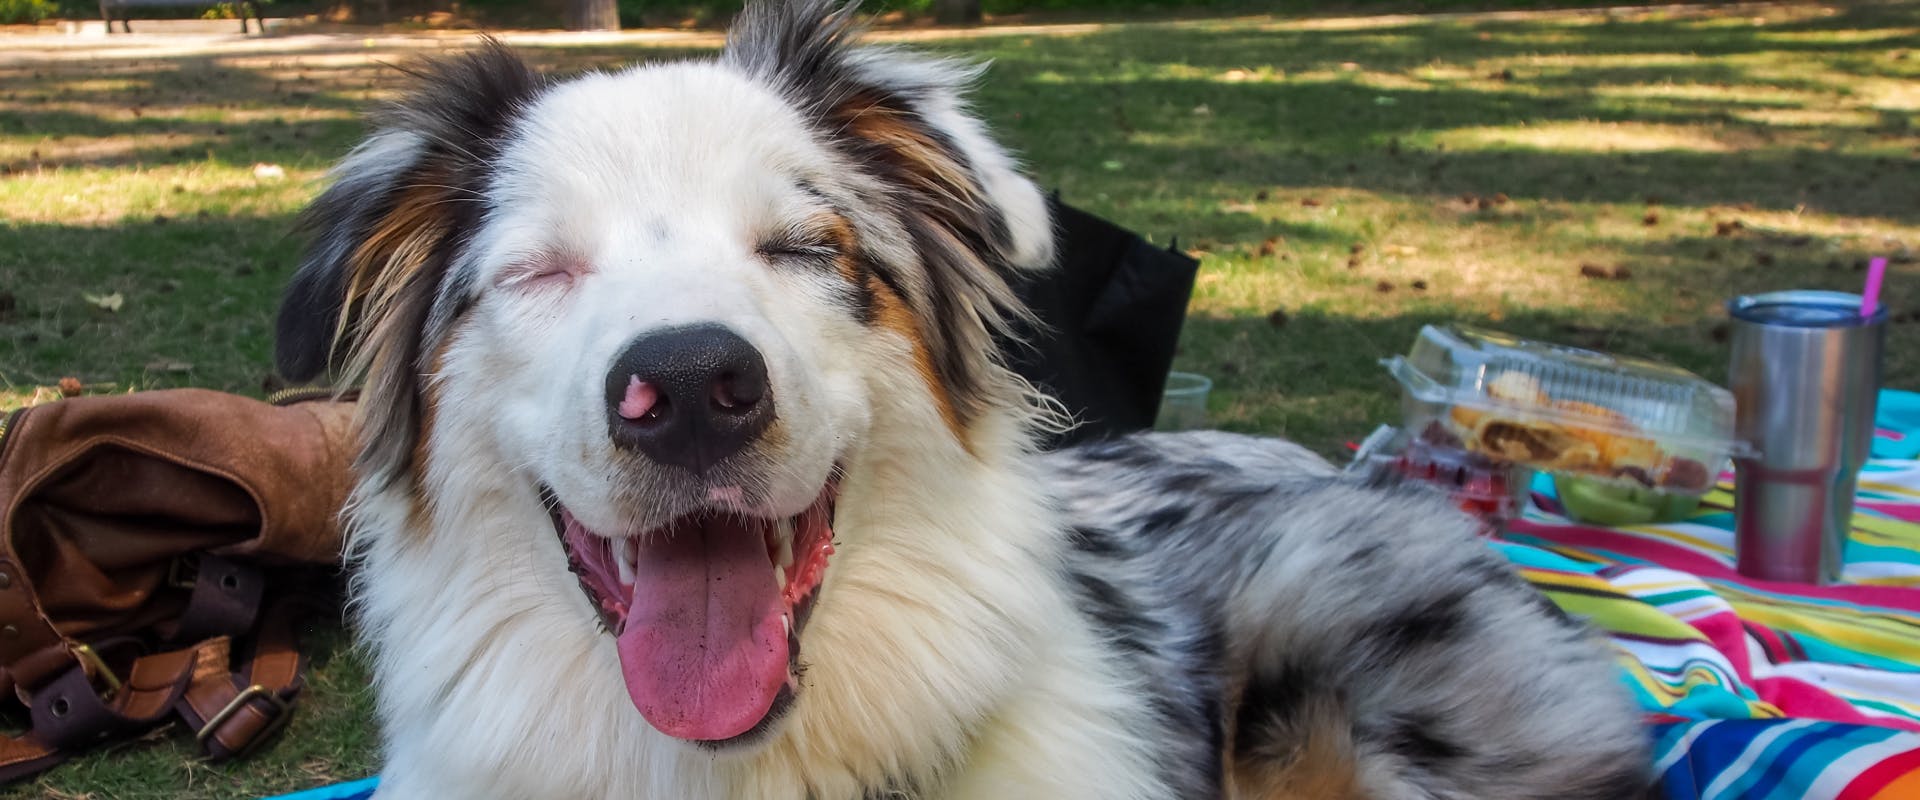 an australian shepherd lying on a picnic blanket with its eyes closed and tongue out while panting